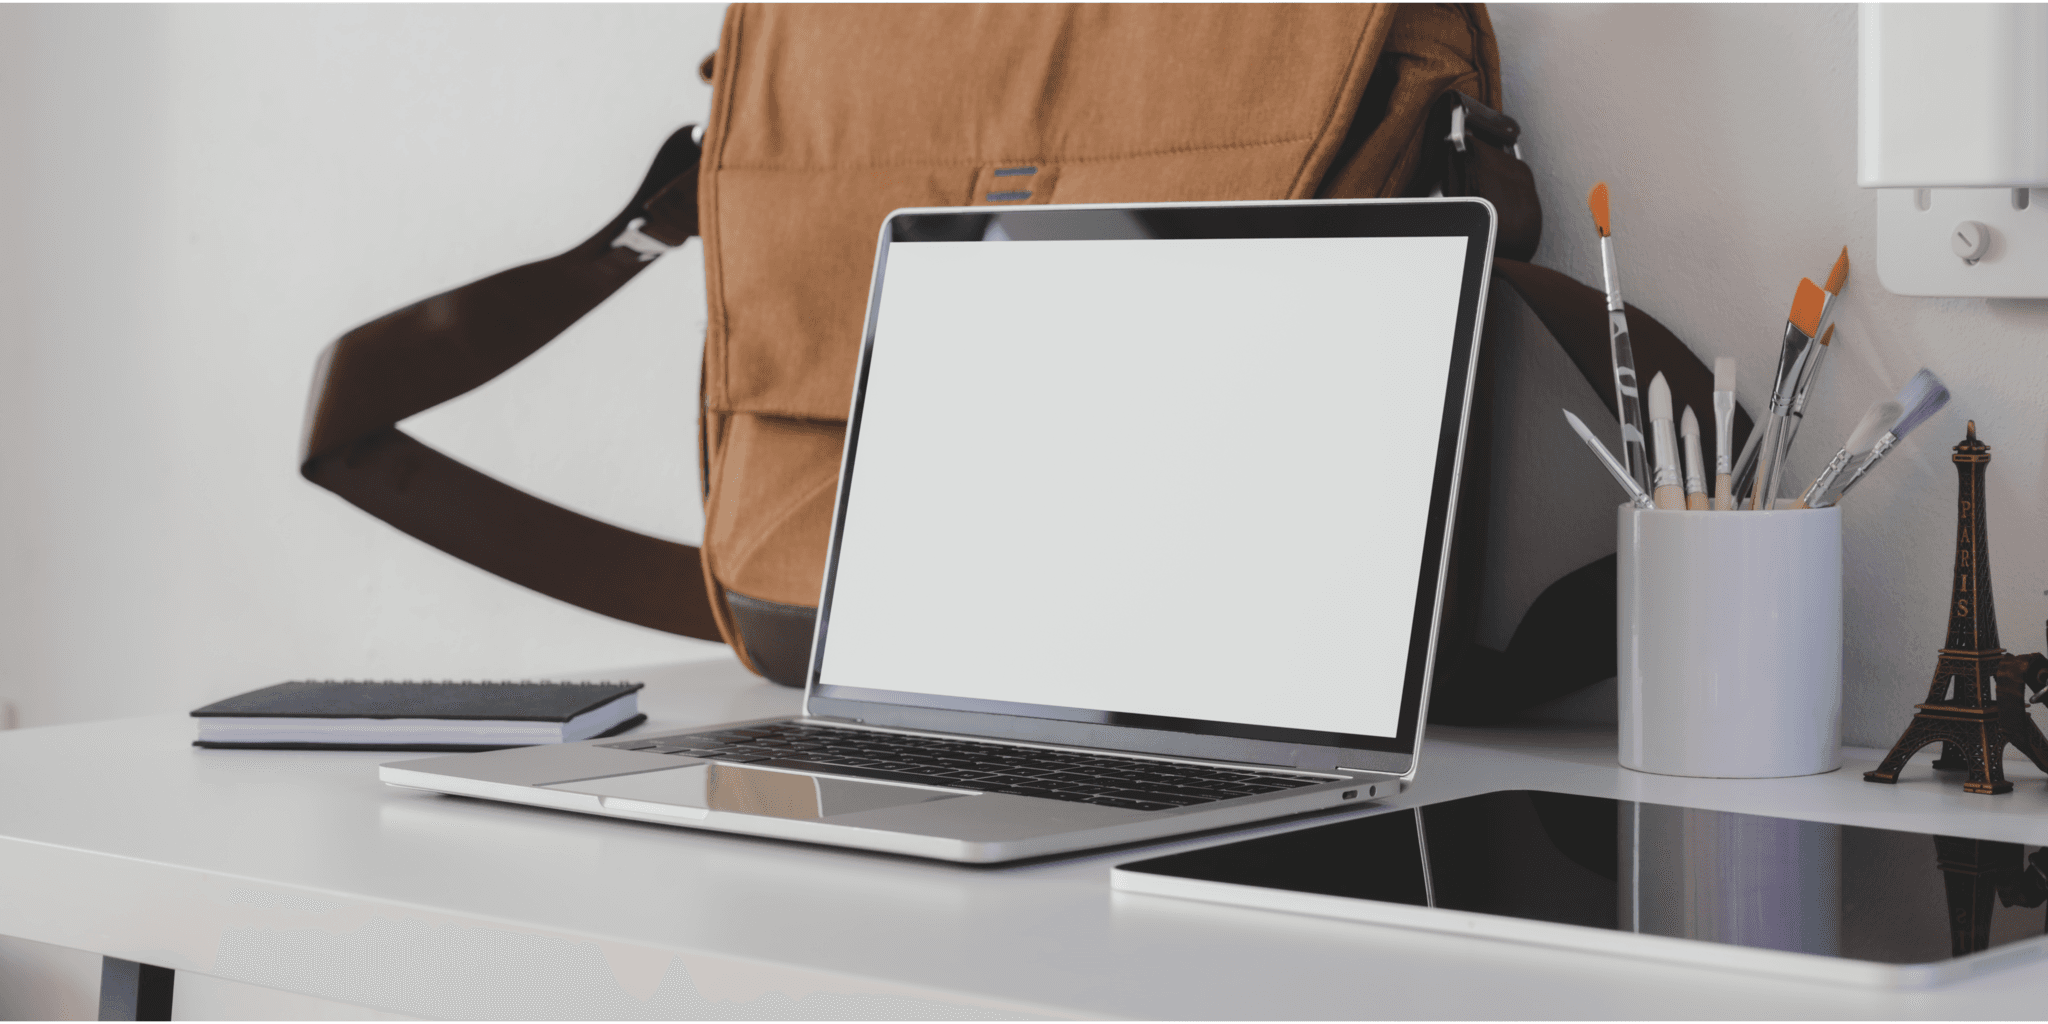 The Best Laptop Features for Writers